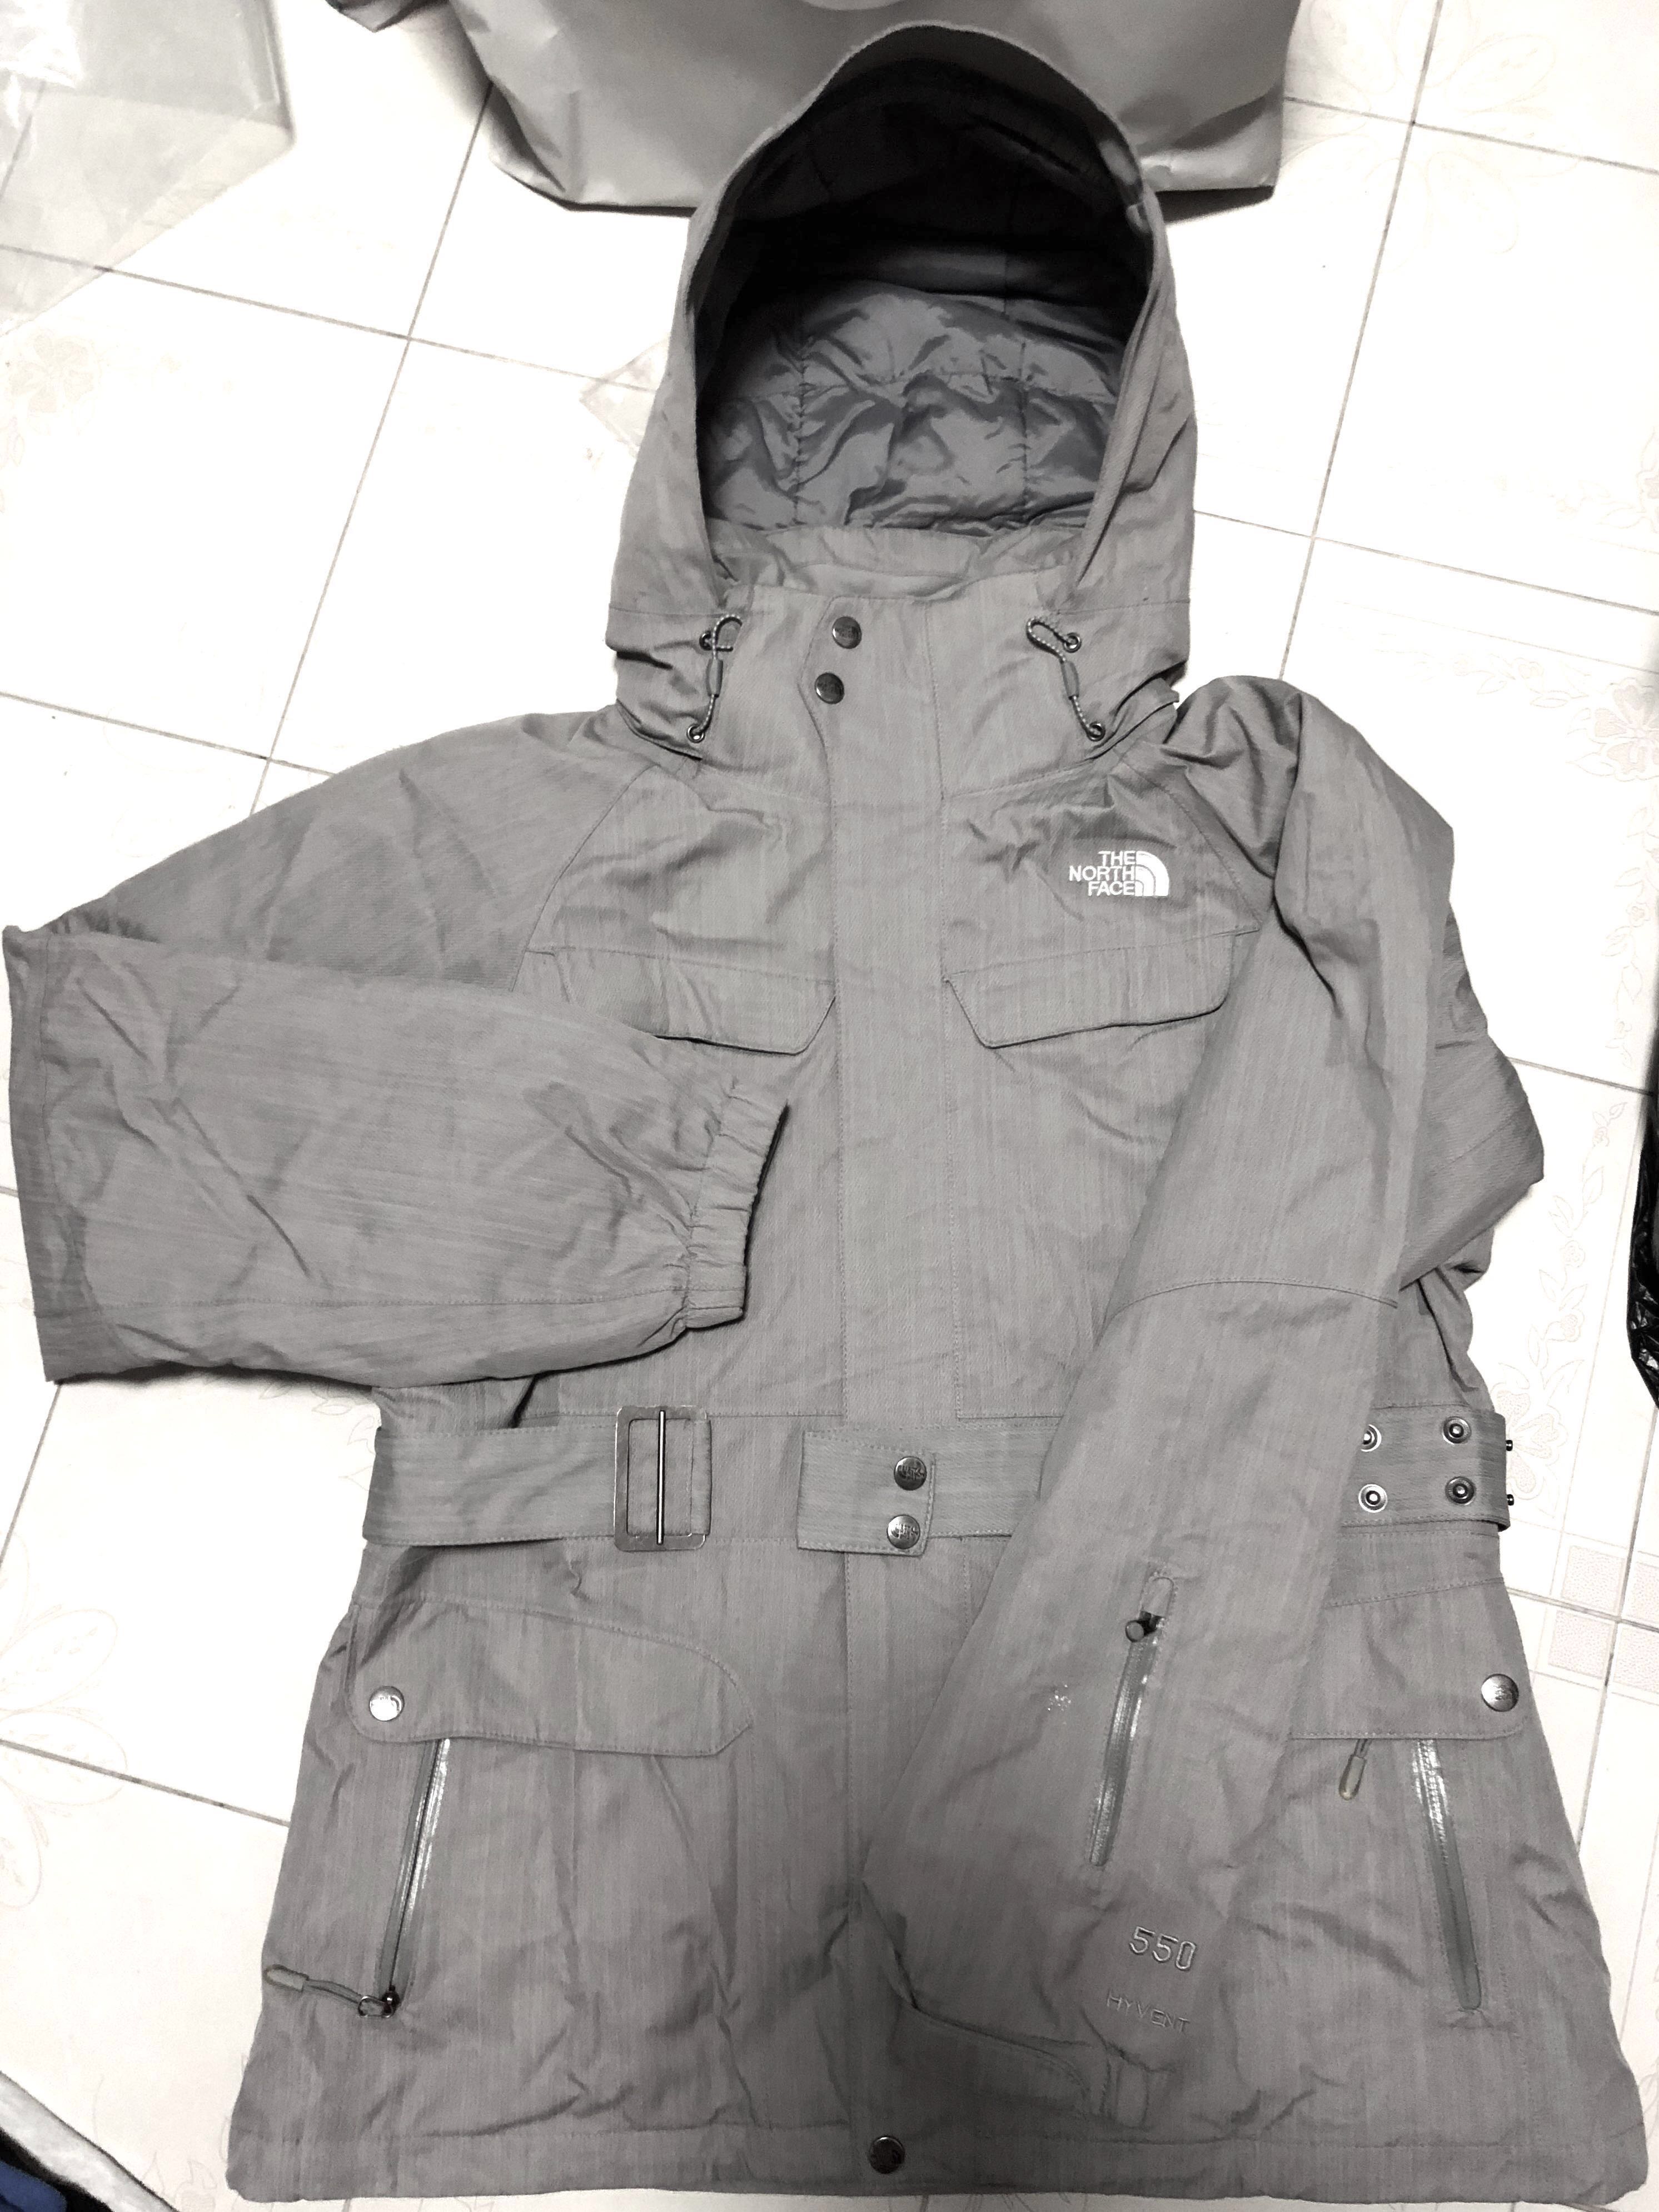 north face down filled winter jacket